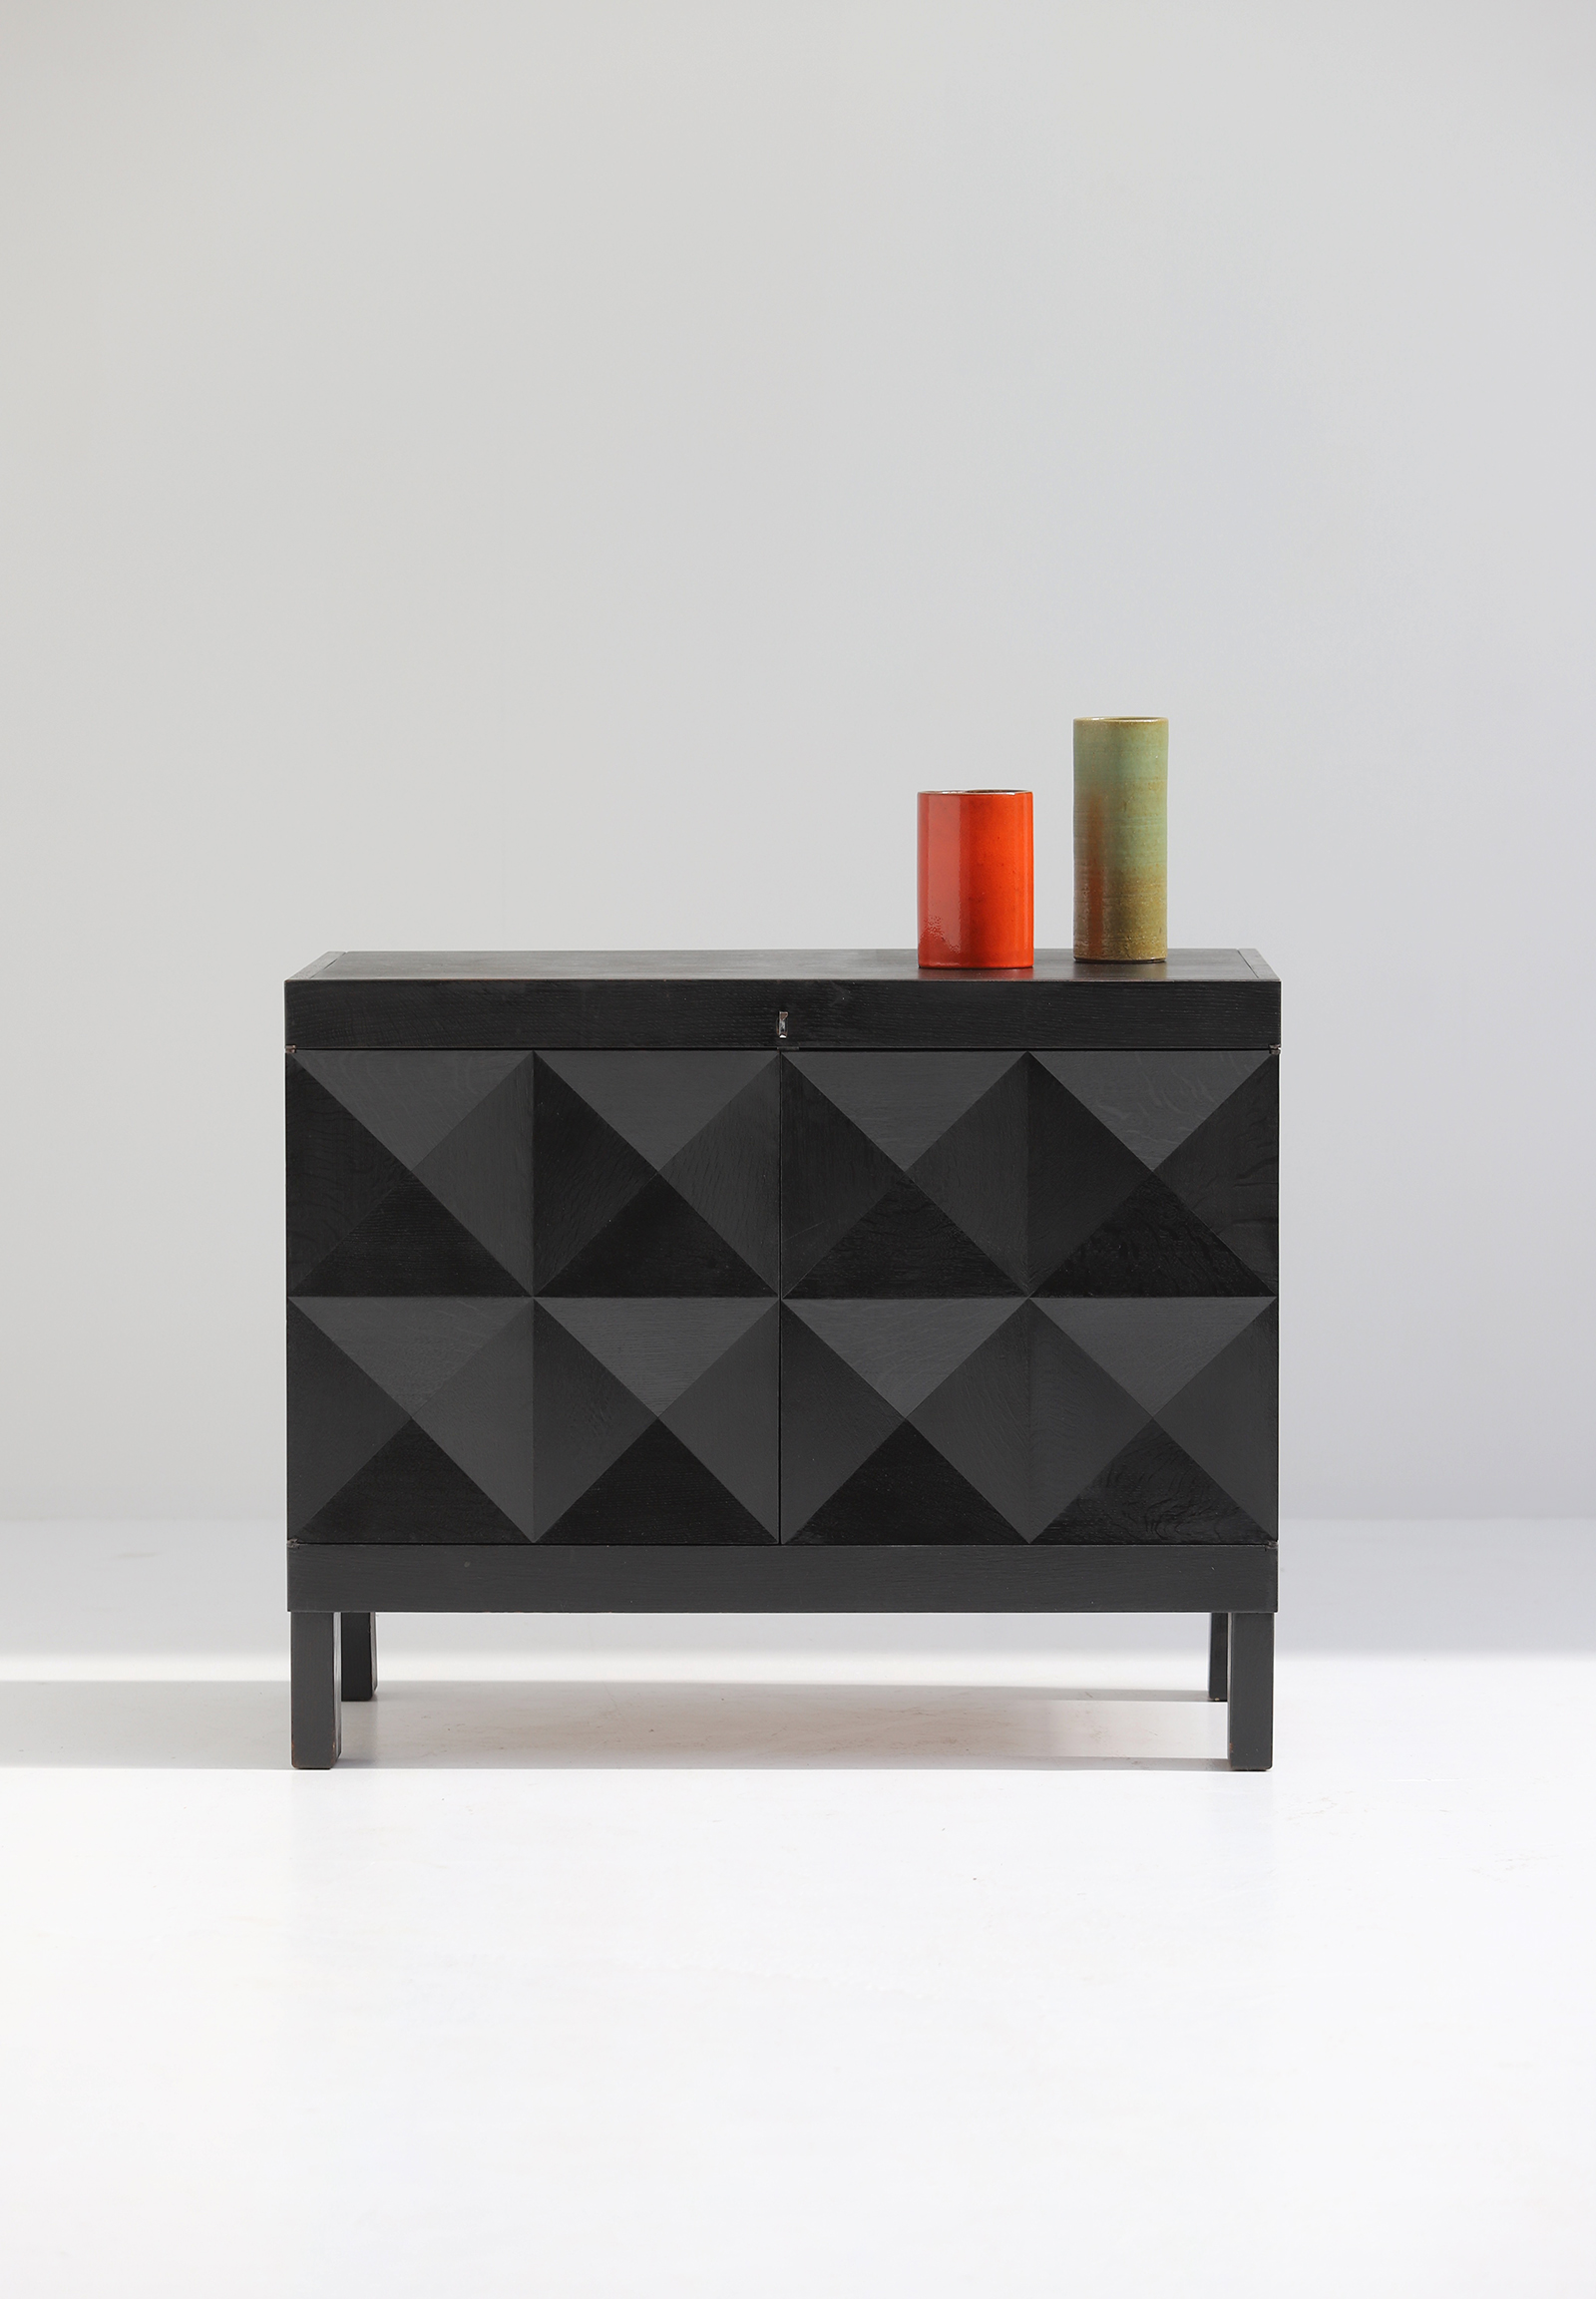 quality crafted cabinet with op-art doors designed by J. Batenburg for MI, Belgium 1969.image 1